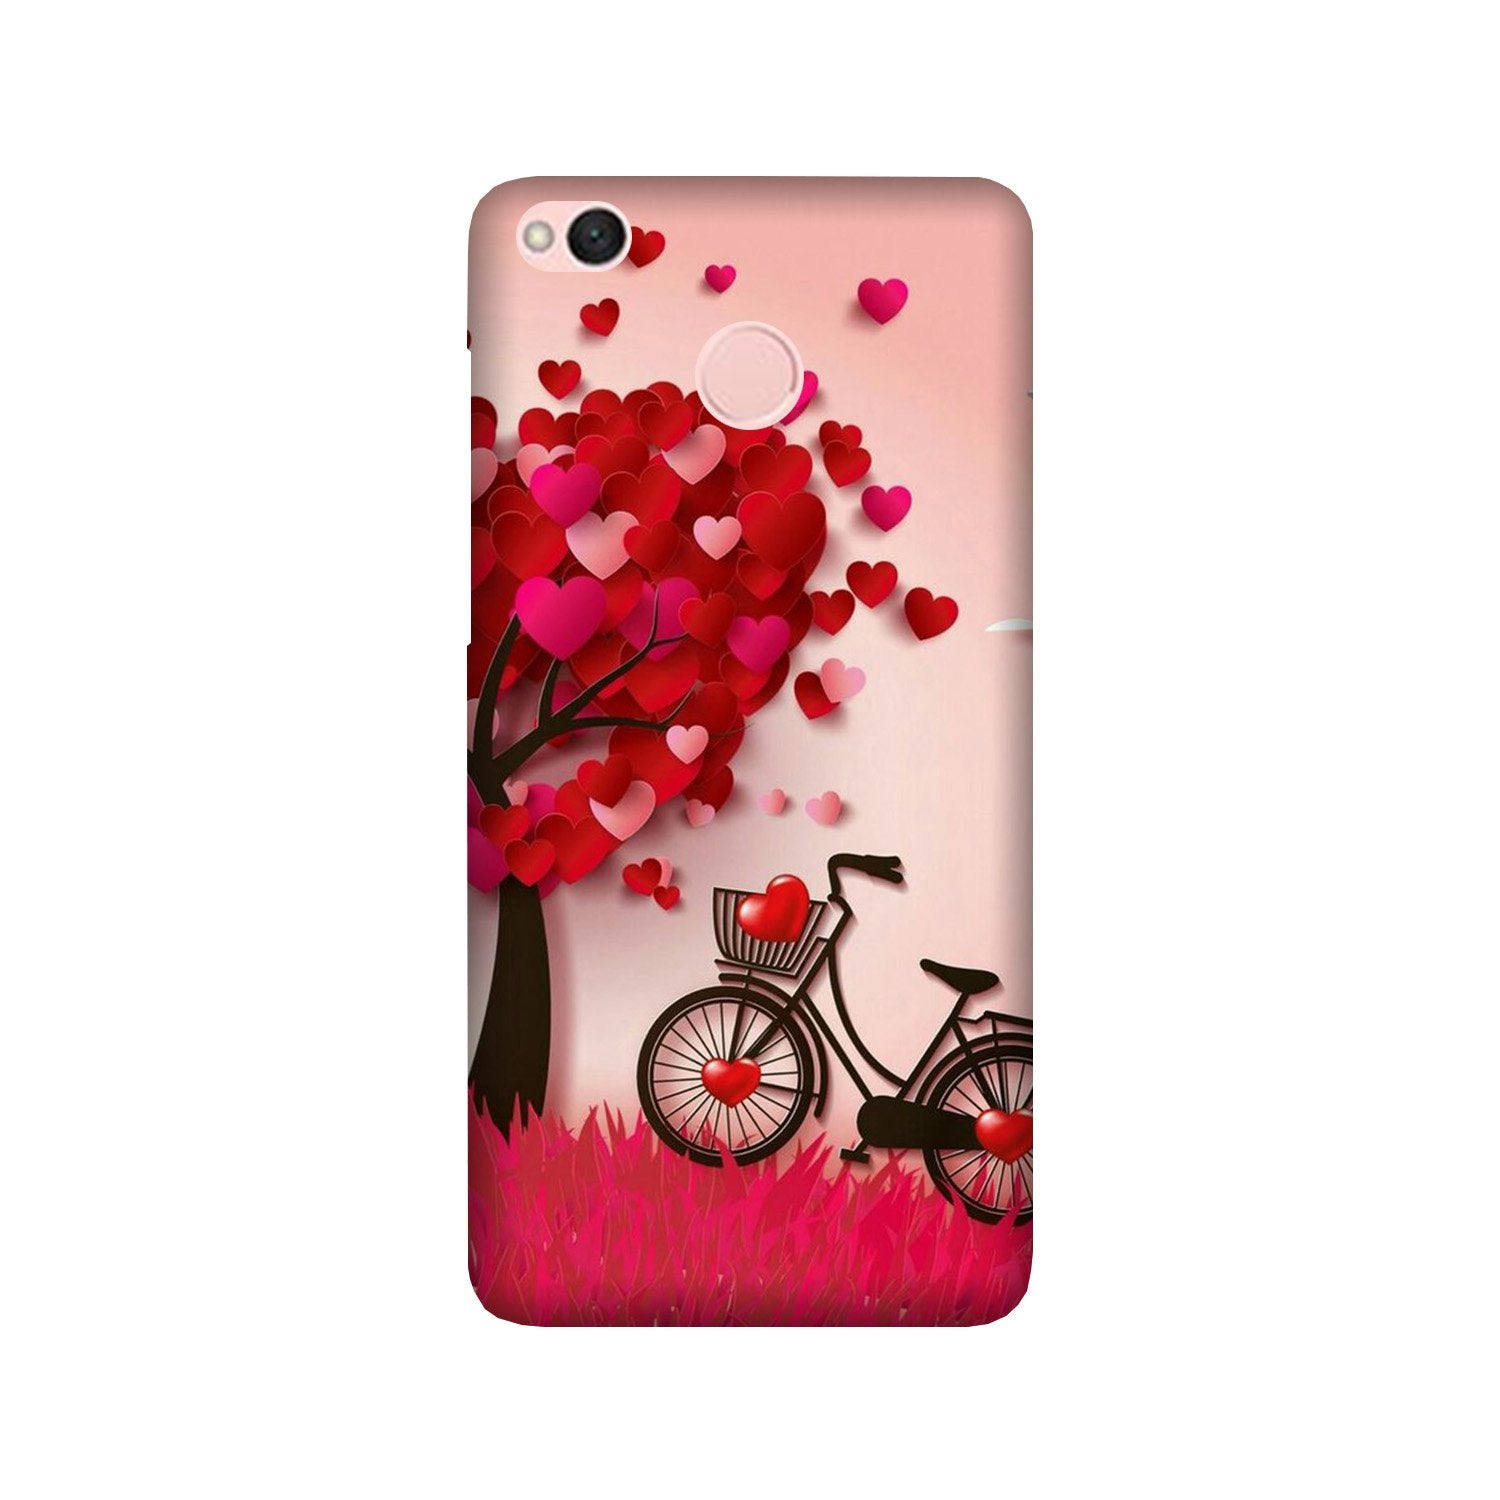 Red Heart Cycle Case for Redmi 4 (Design No. 222)